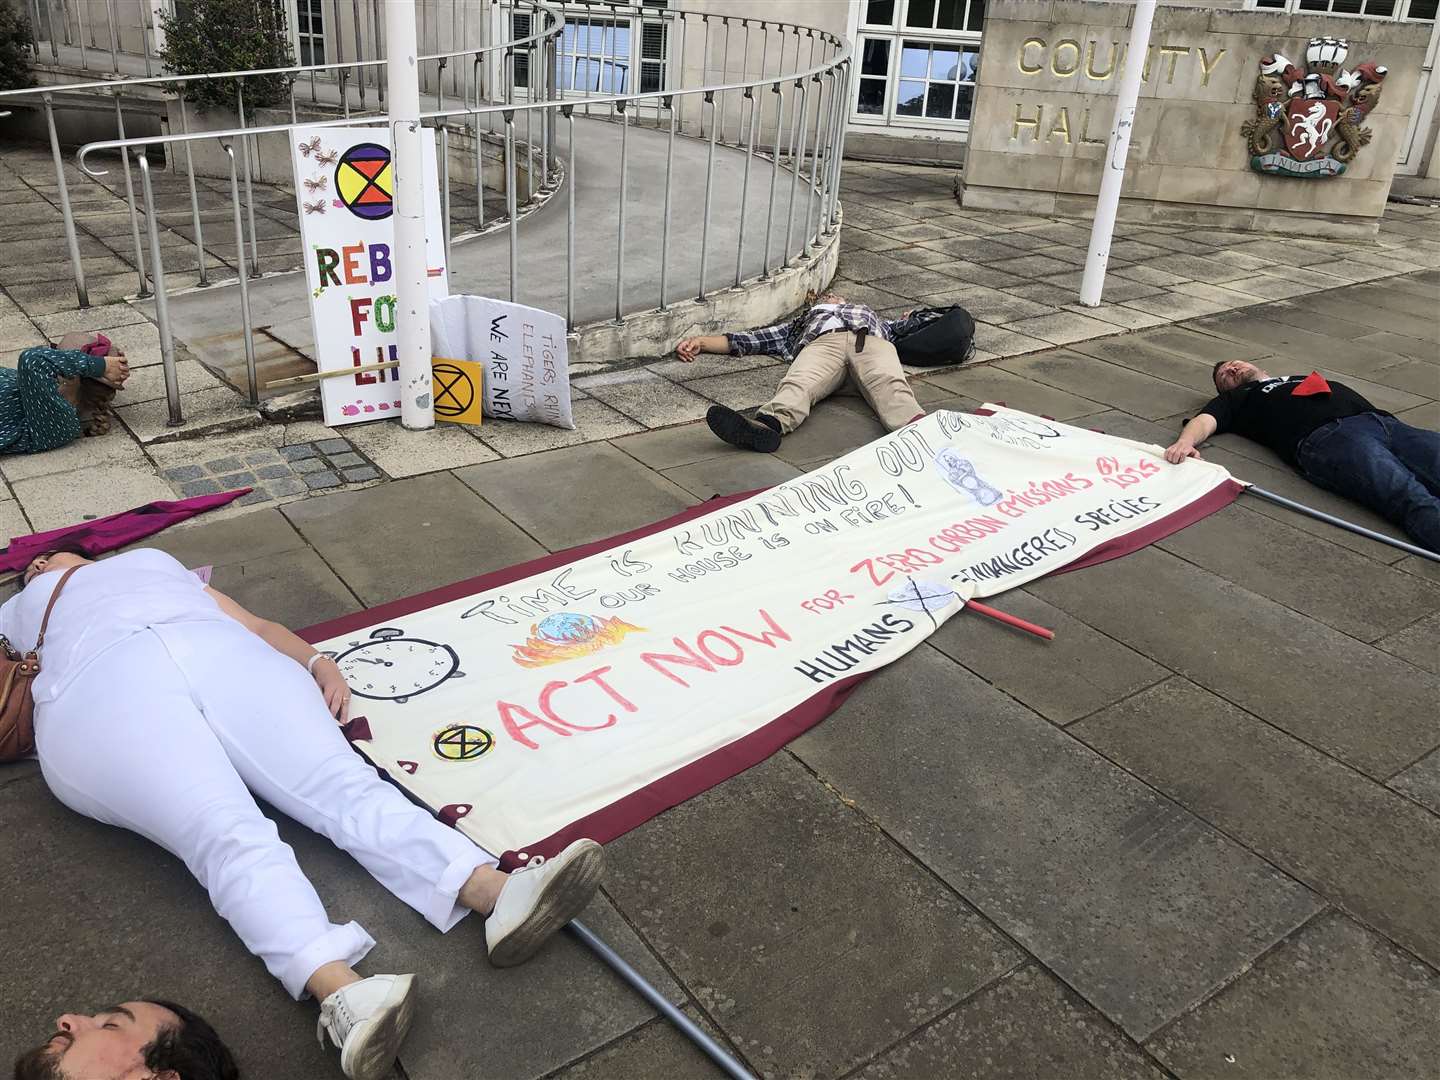 Extinction Rebellion protesters will stage a "die-in" outside County Hall in Maidstone